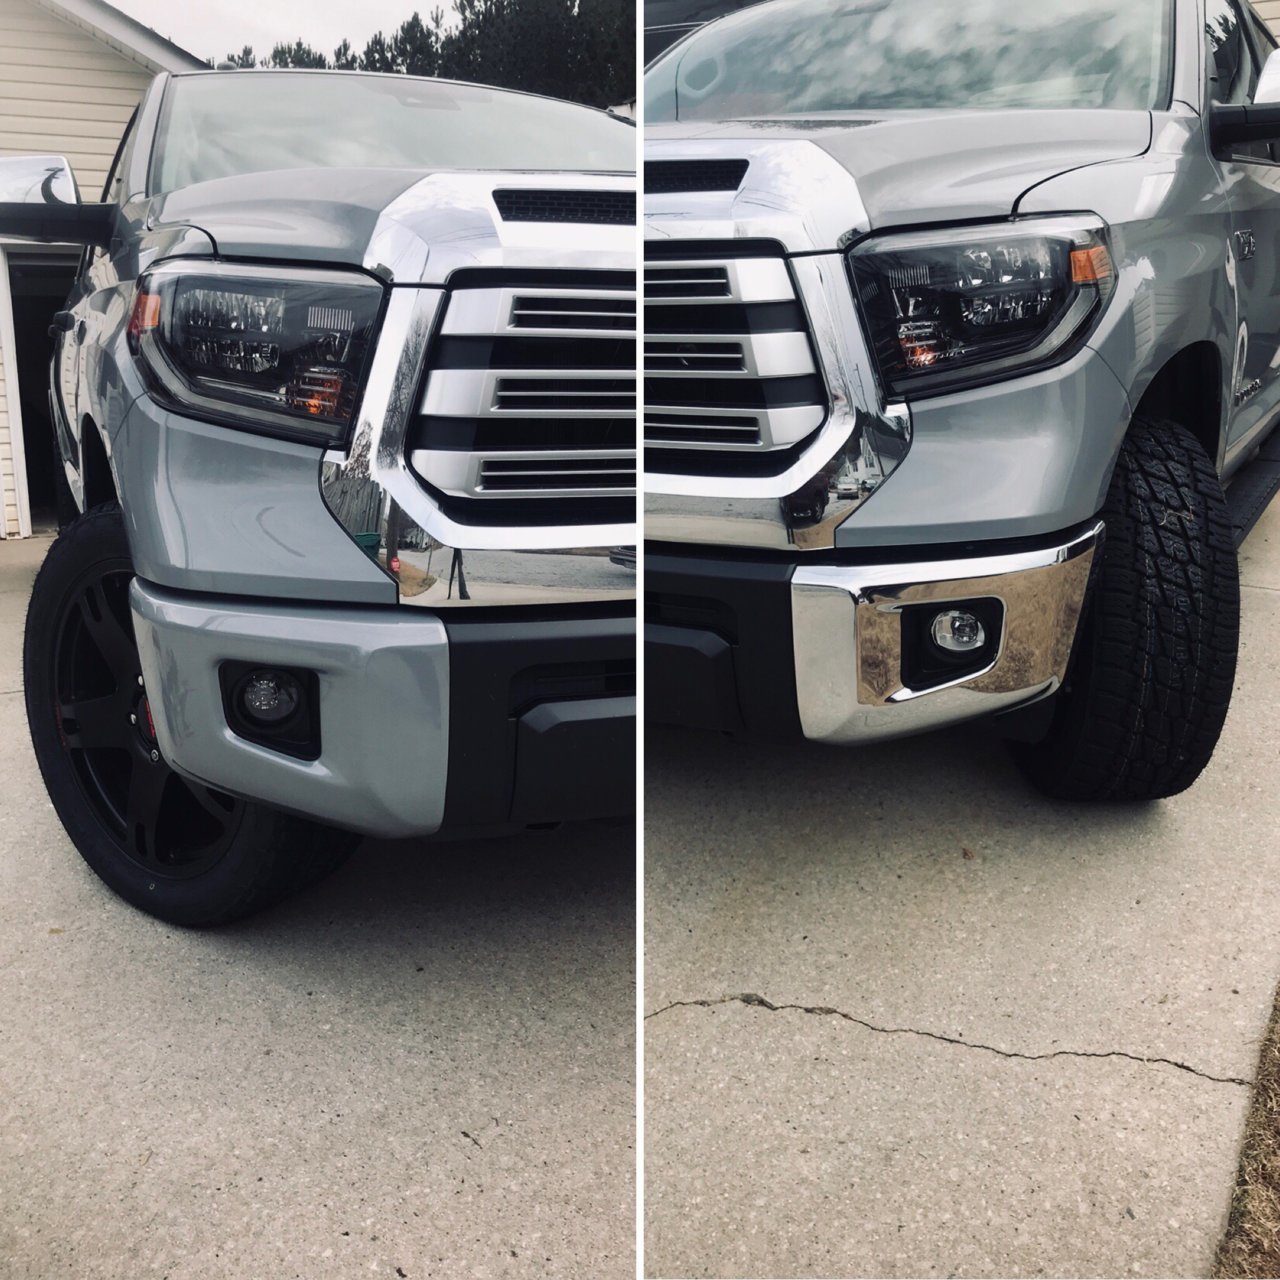 Help with Next Modifications | Toyota Tundra Forum